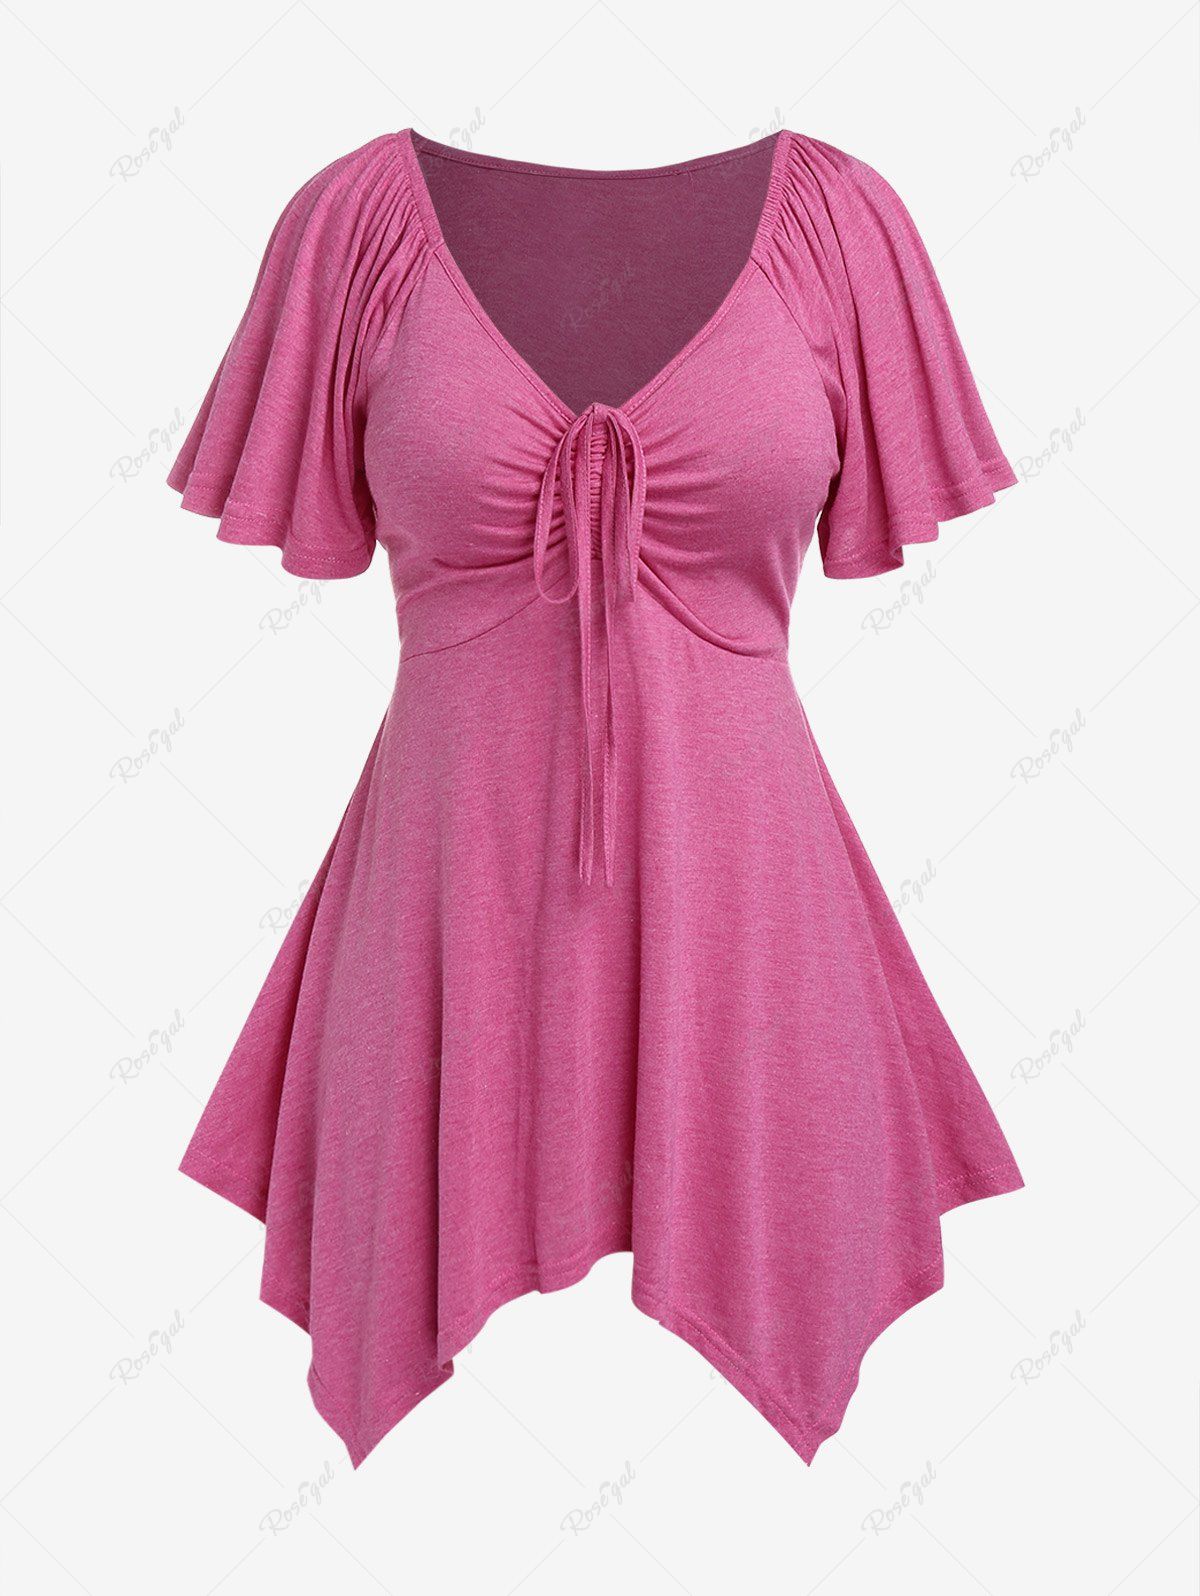 Fashion Plus Size Cinched Ruched Handkerchief Hem Butterfly Sleeve Top  